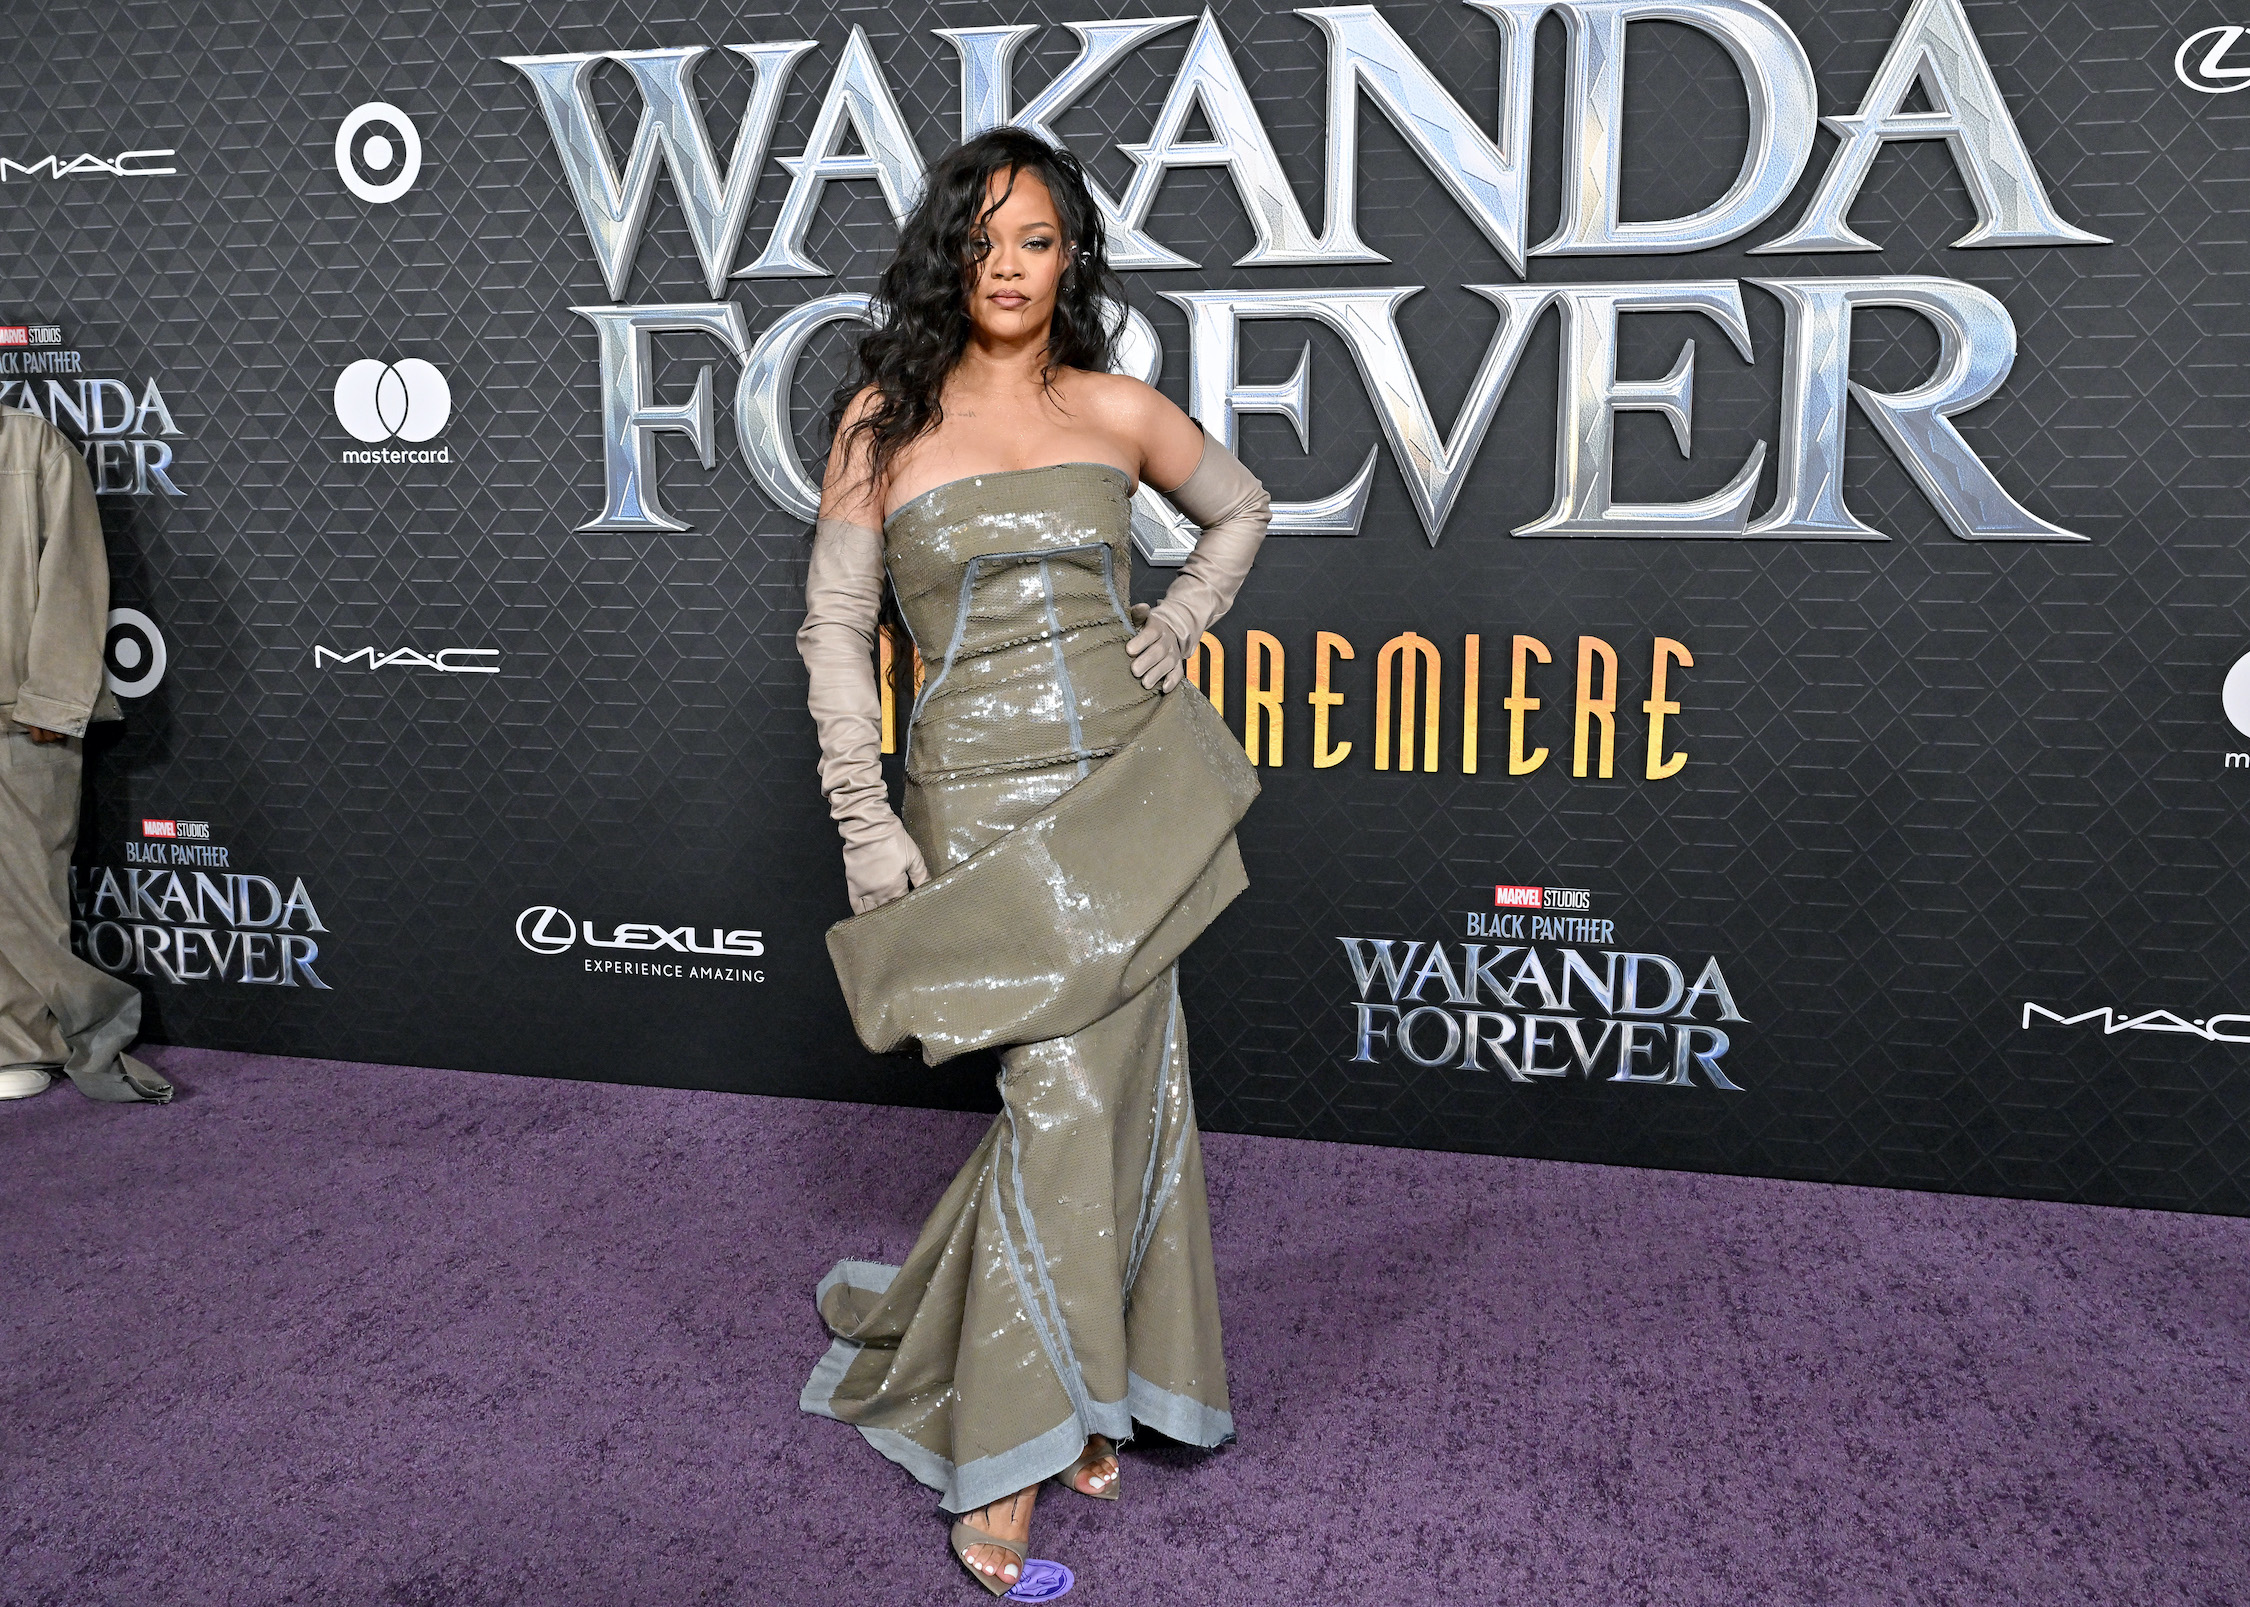 'Lift Me Up' singer Rihanna attends Marvel Studios' Black Panther: Wakanda Forever' premiere at the Dolby Theatre in Hollywood, California